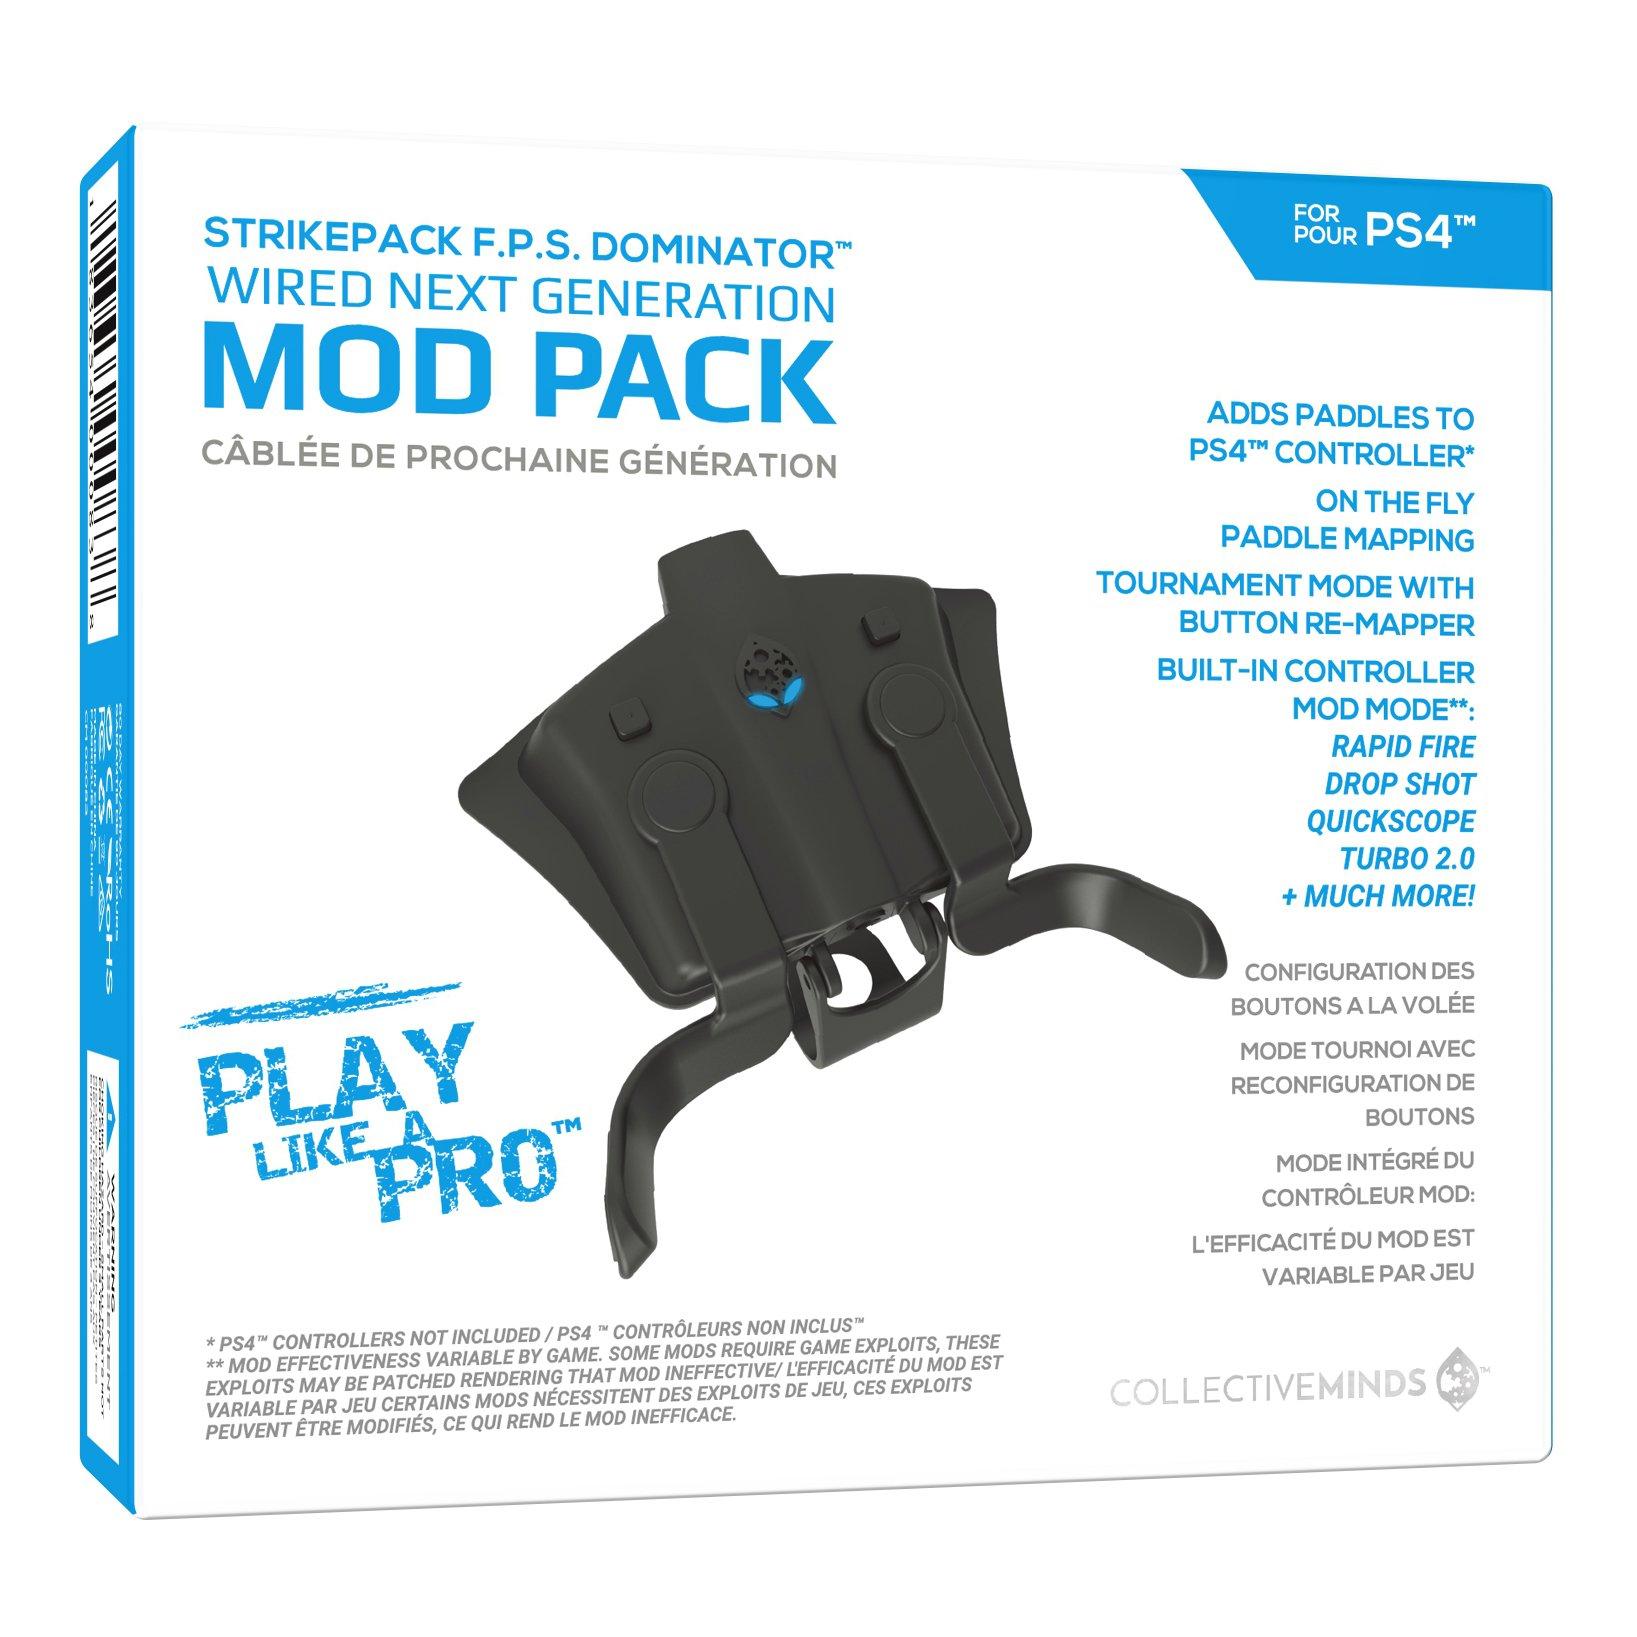 Ps4 Strike Pack F P S Dominator Controller Adapter With Mod Pack Playstation 4 Gamestop